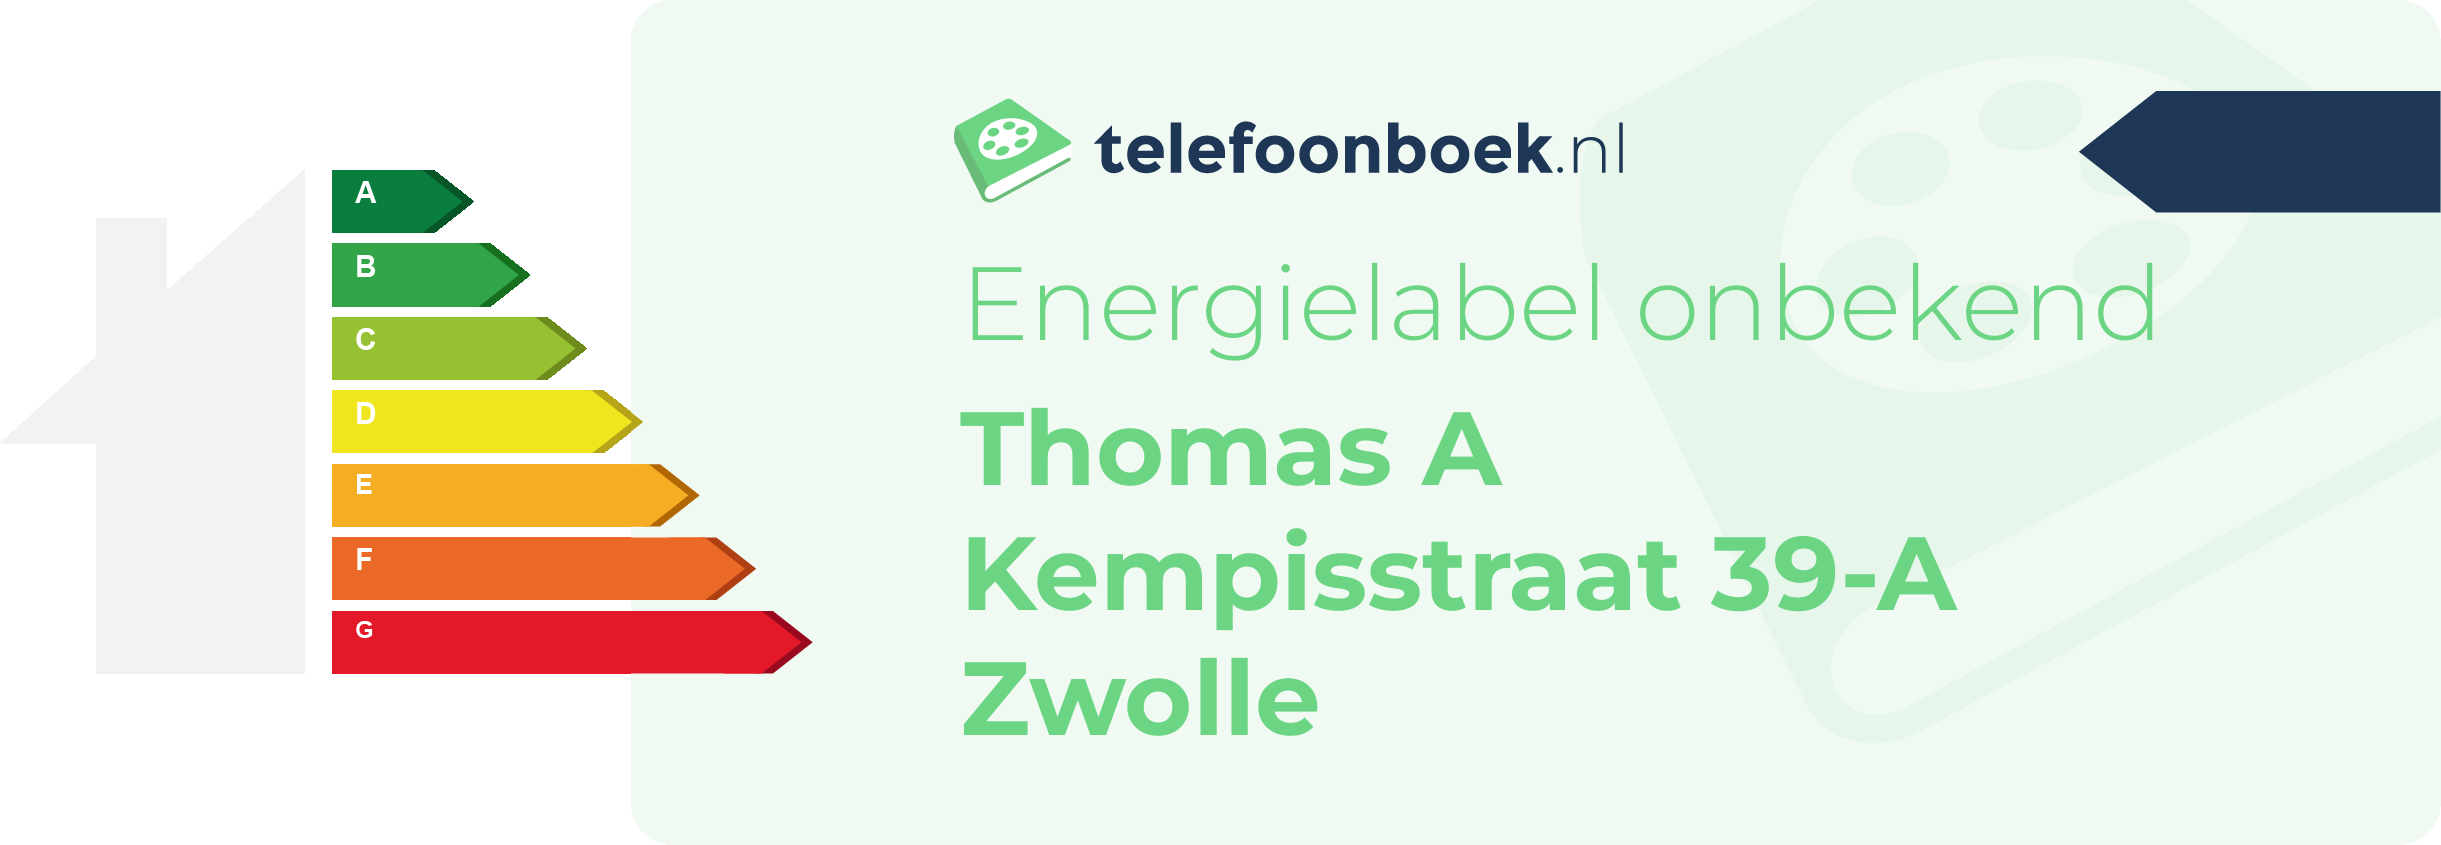 Energielabel Thomas A Kempisstraat 39-A Zwolle